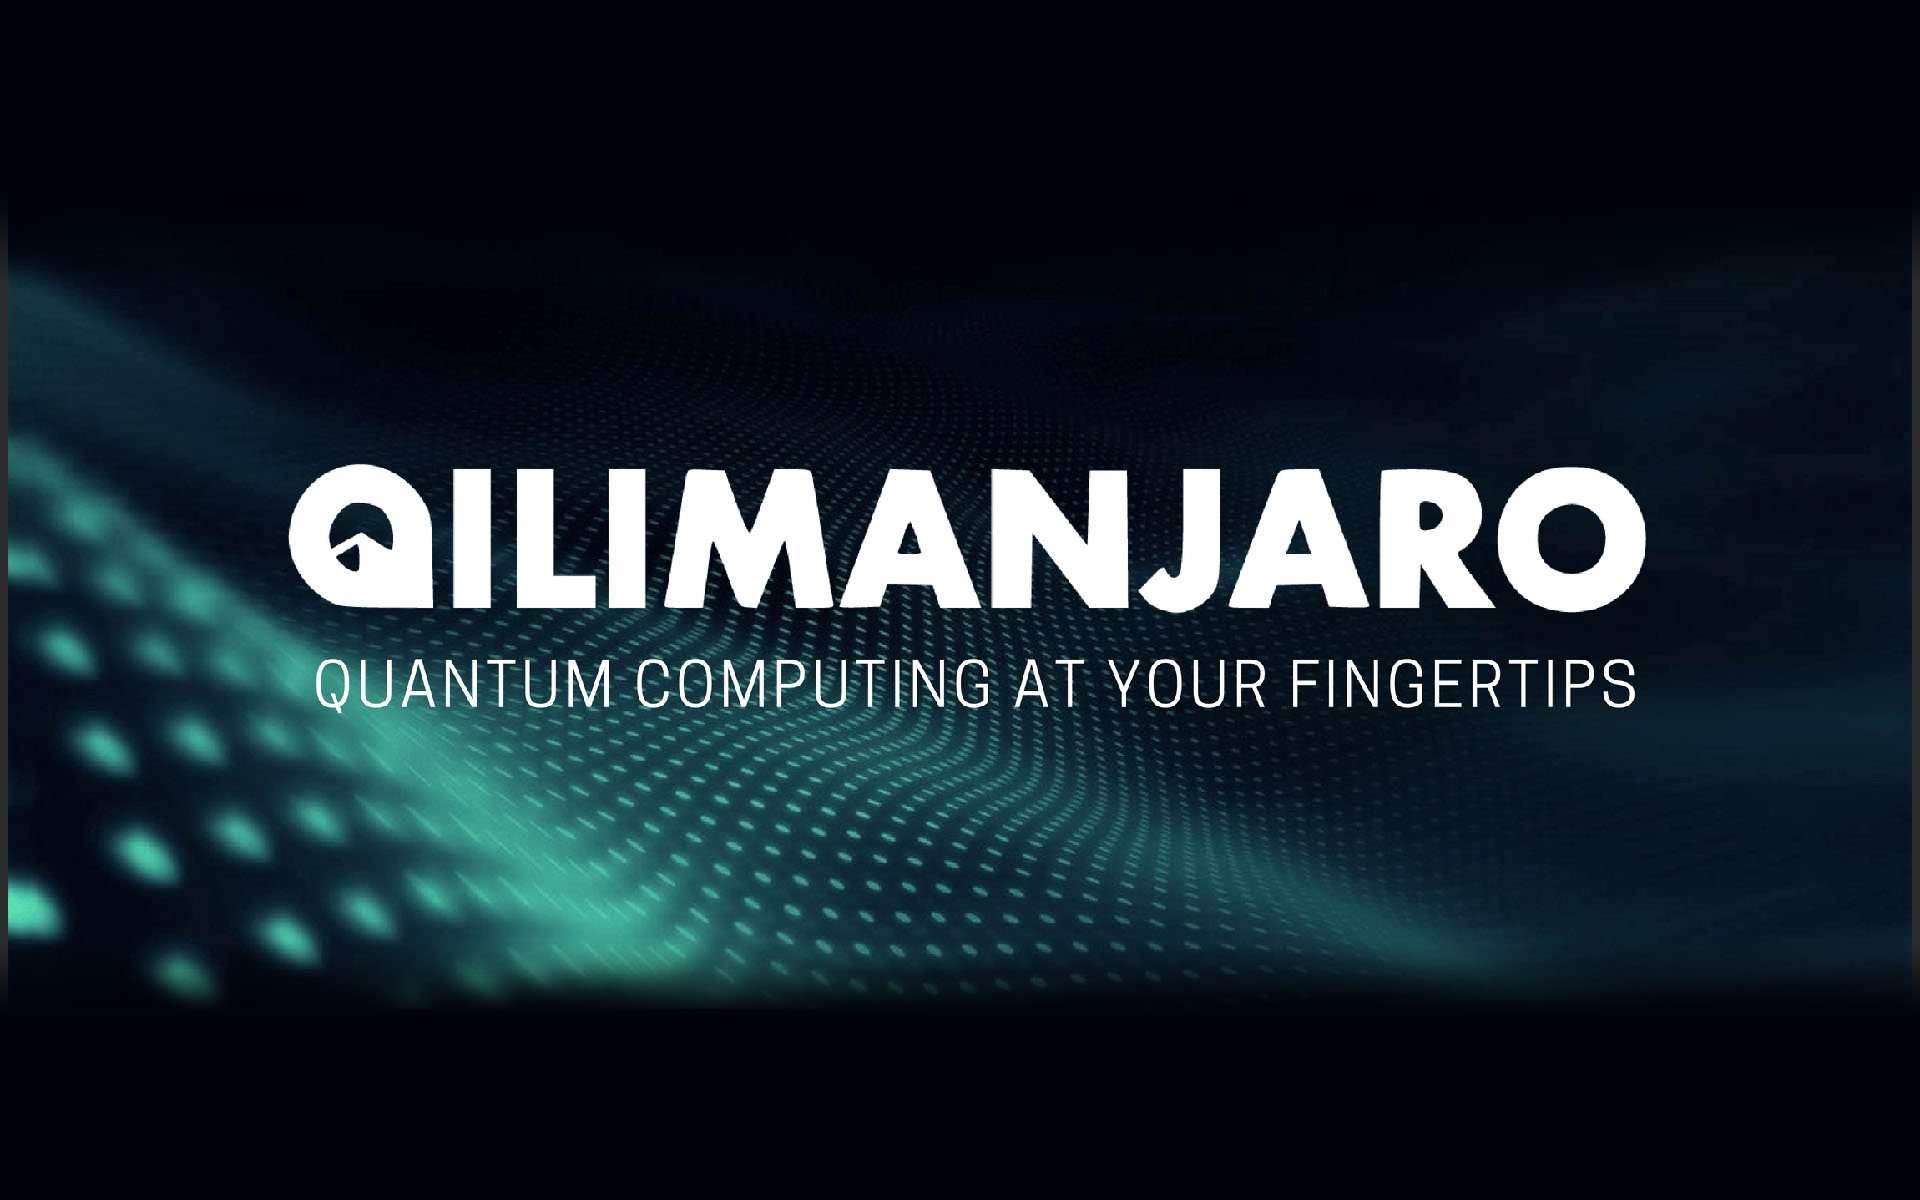 Quantum Computing to Be Shared with the World Through Cloud Technology Thanks to Qilimanjaro